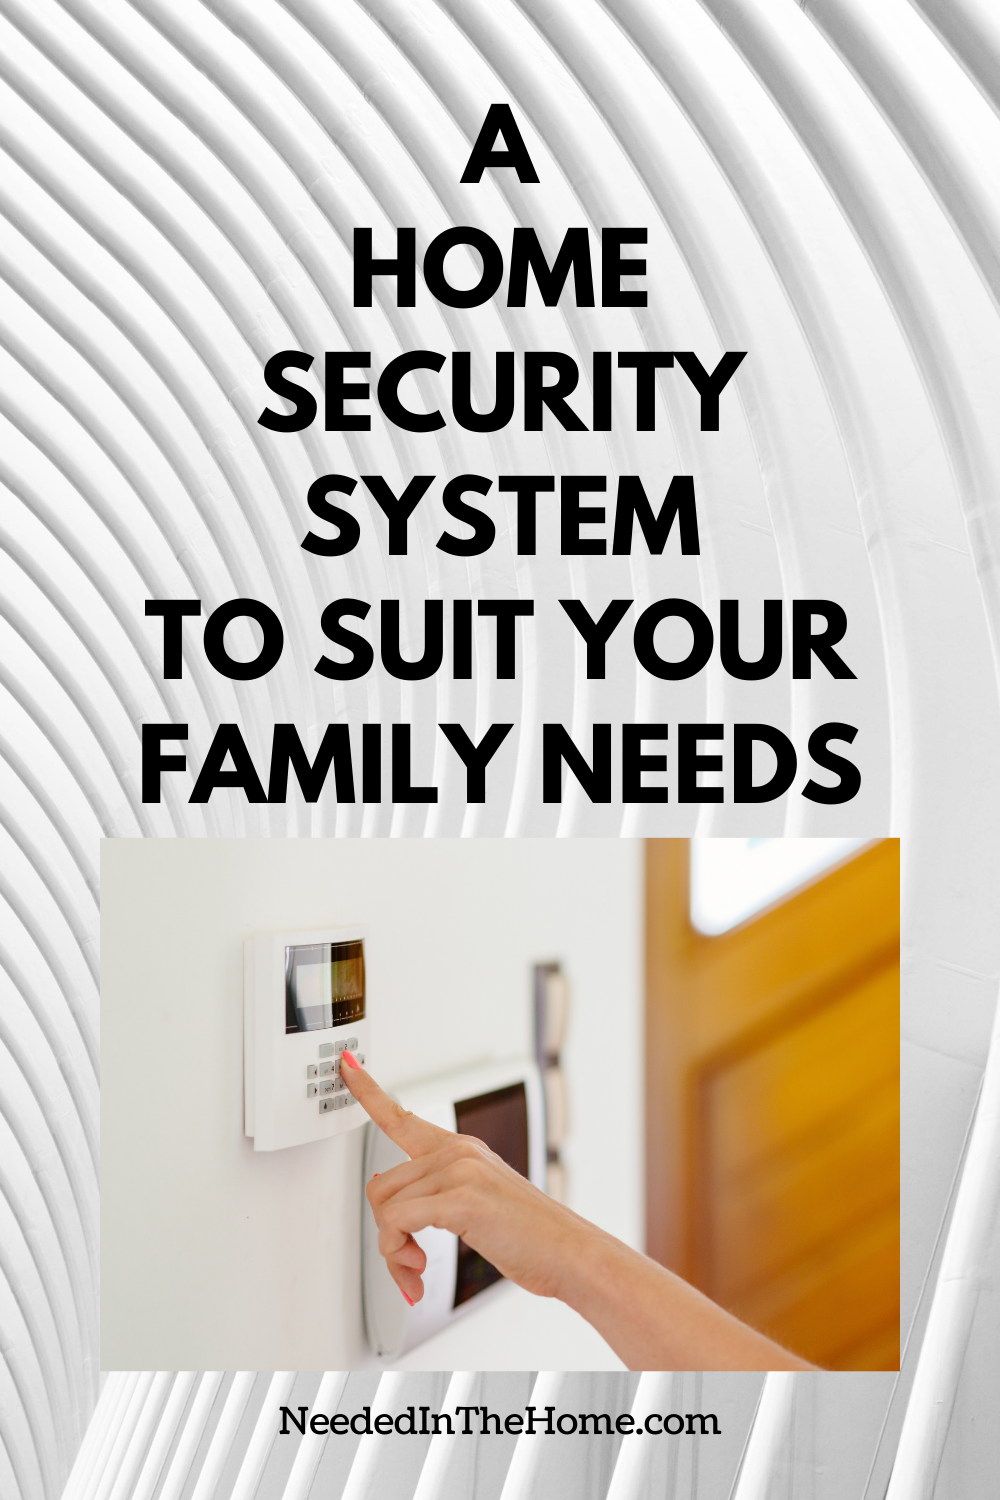 pinterest-pin-description a home security system to suit your family needs finger arming system buttons neededinthehome